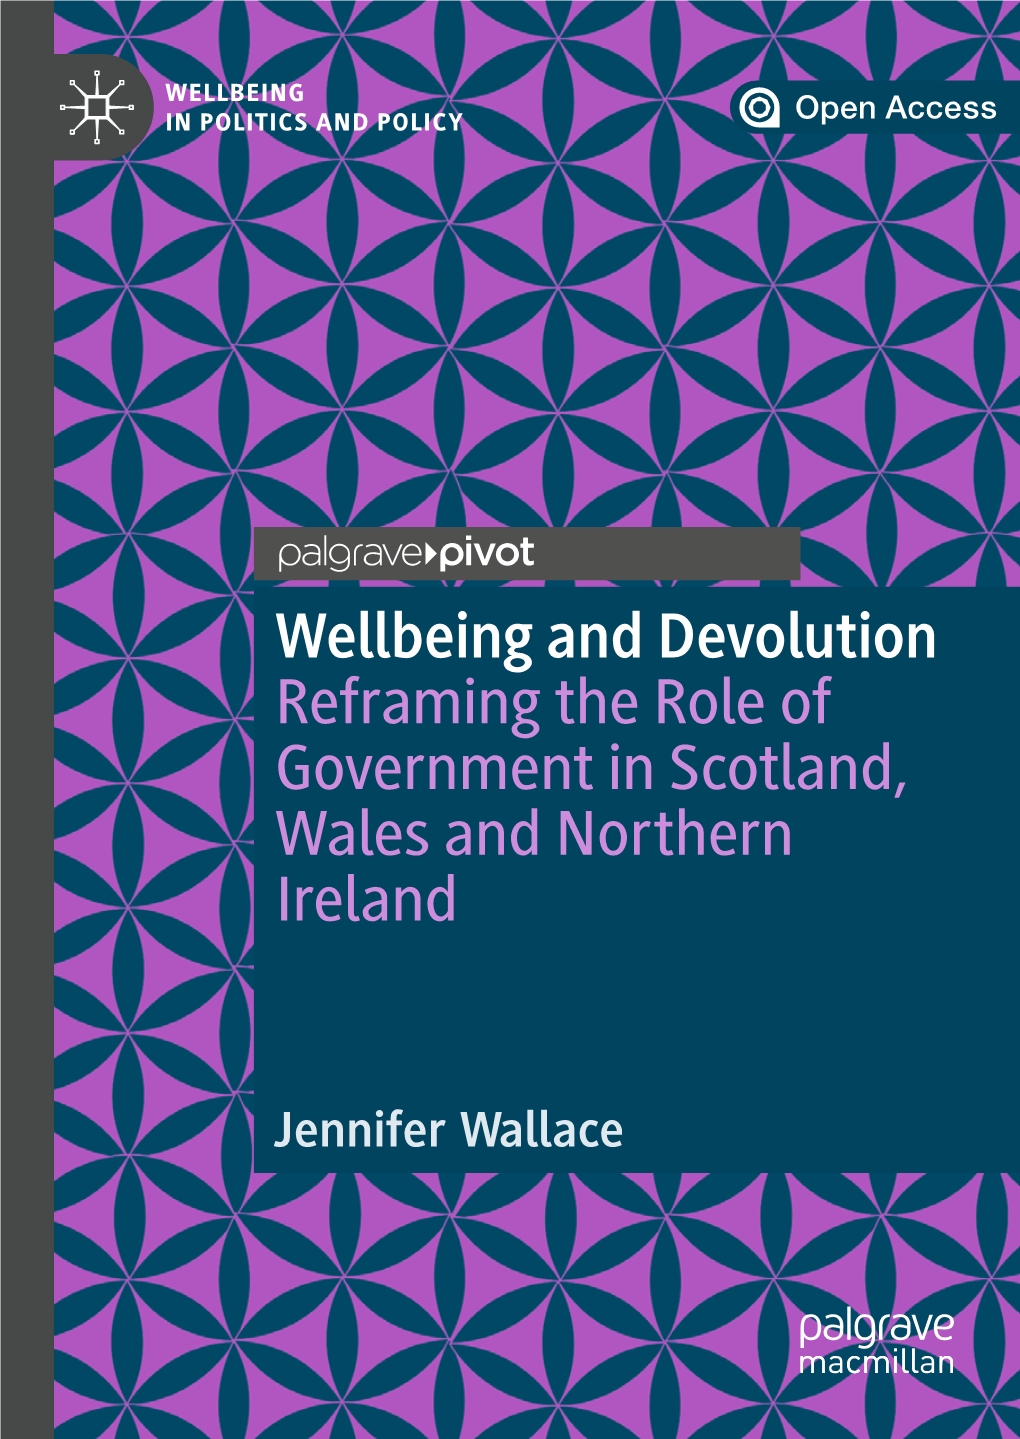 Reframing the Role of Government in Scotland, Wales and Northern Ireland